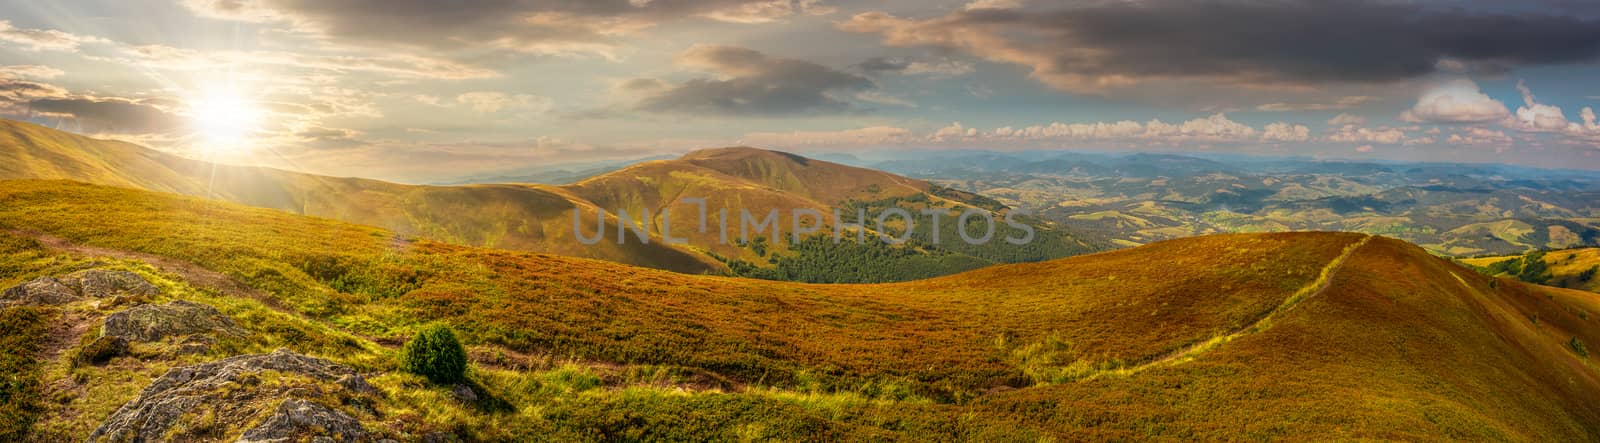 panoramic summer landscape in Carpathians at sunset by Pellinni